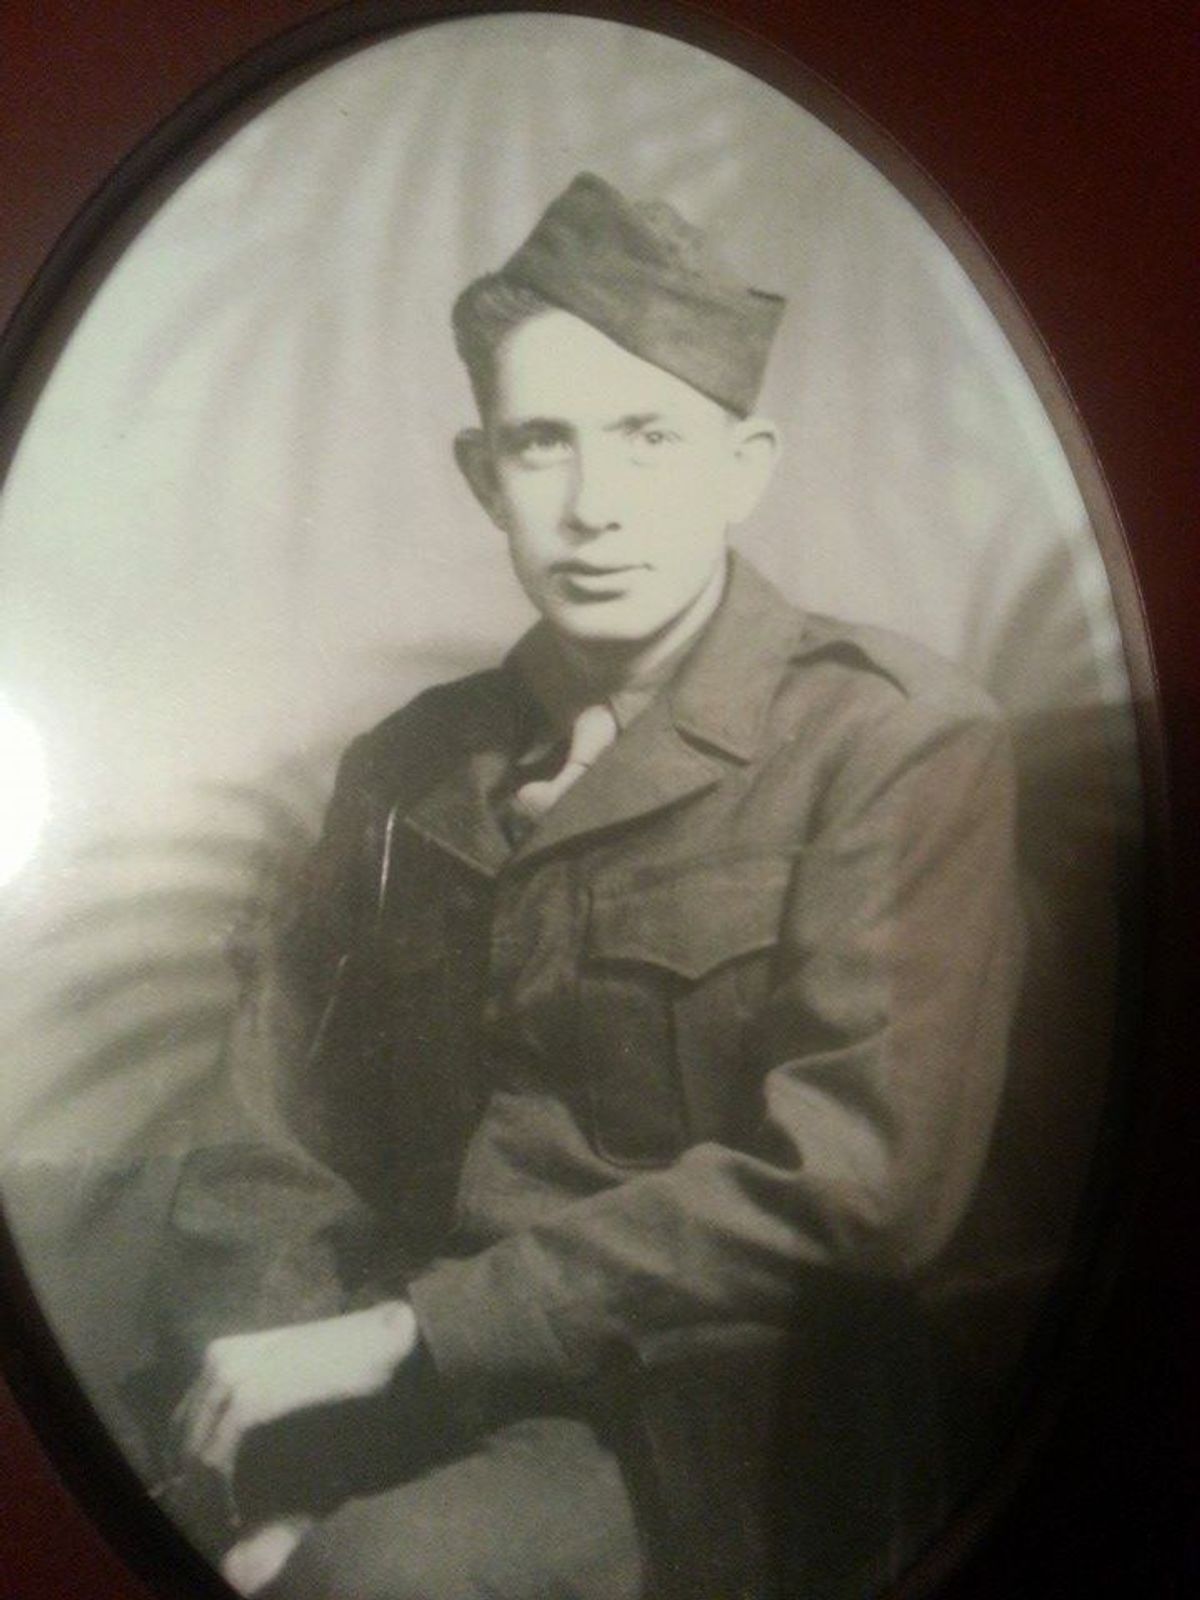 Remembering My Grandfather, Silvan Oather Brown